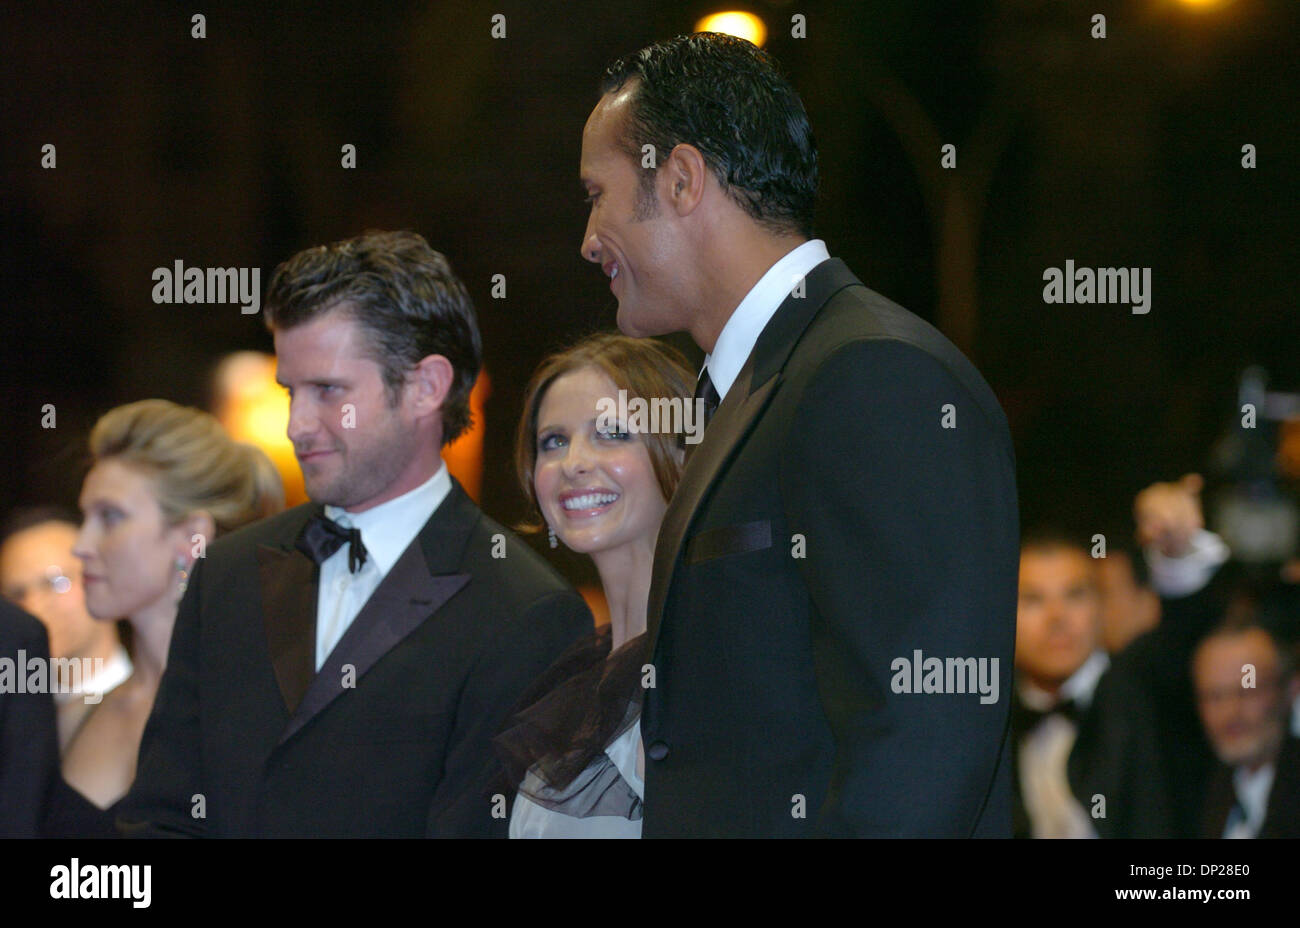 May 21, 2006; Cannes, FRANCE; Writer/director RICHARD KELLY with actors SARAH MICHELLE GELLAR and DWAYNE 'THE ROCK' JOHNSON at the 'Southland Tales' premiere at the 59th Cannes Film Festival. Mandatory Credit: Photo by Frederic Injimbert/ZUMA Press. (©) Copyright 2006 by Frederic Injimbert Stock Photo